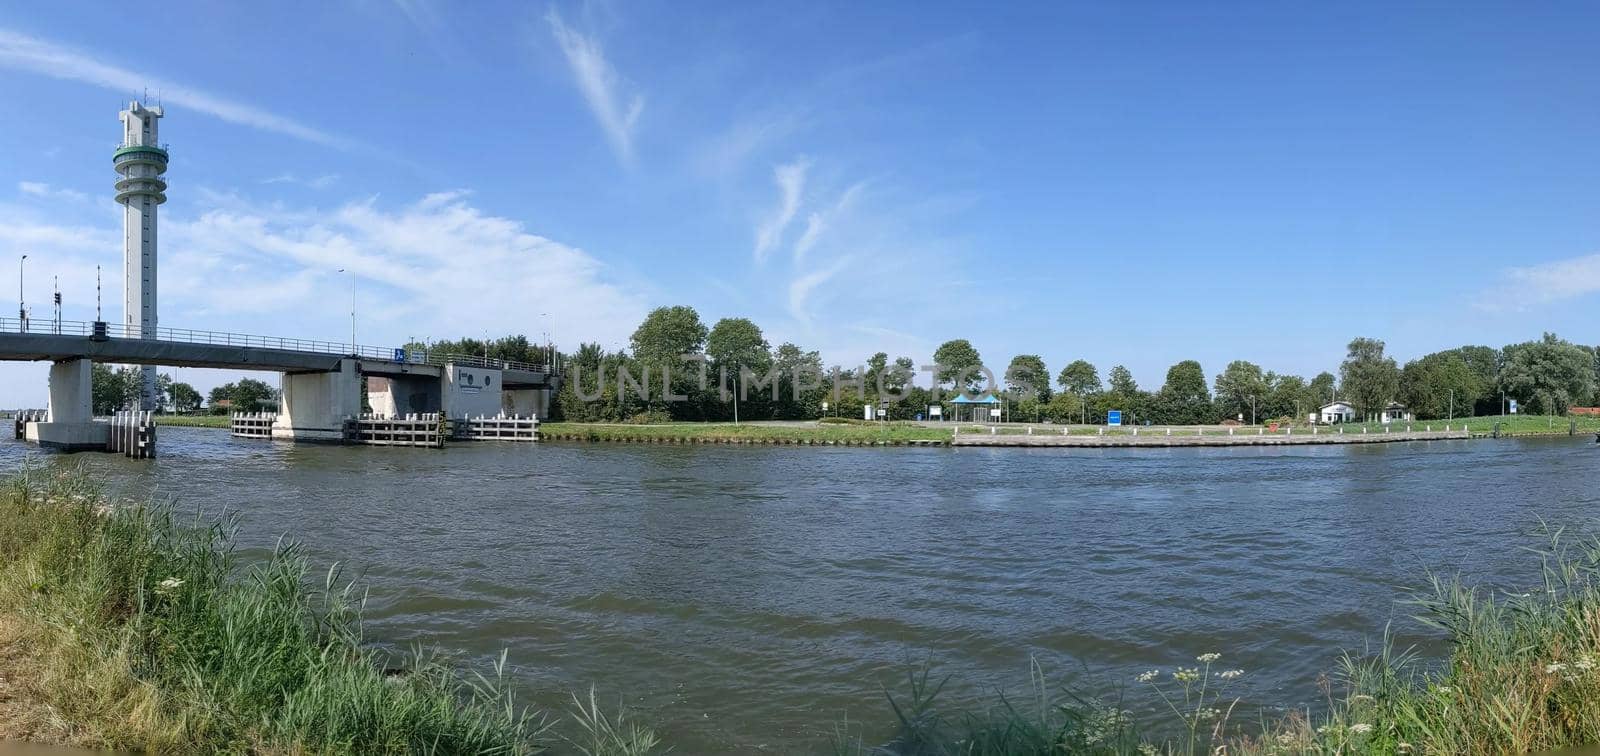 Panorama from a Princess margriet canal in Spannenburg by traveltelly